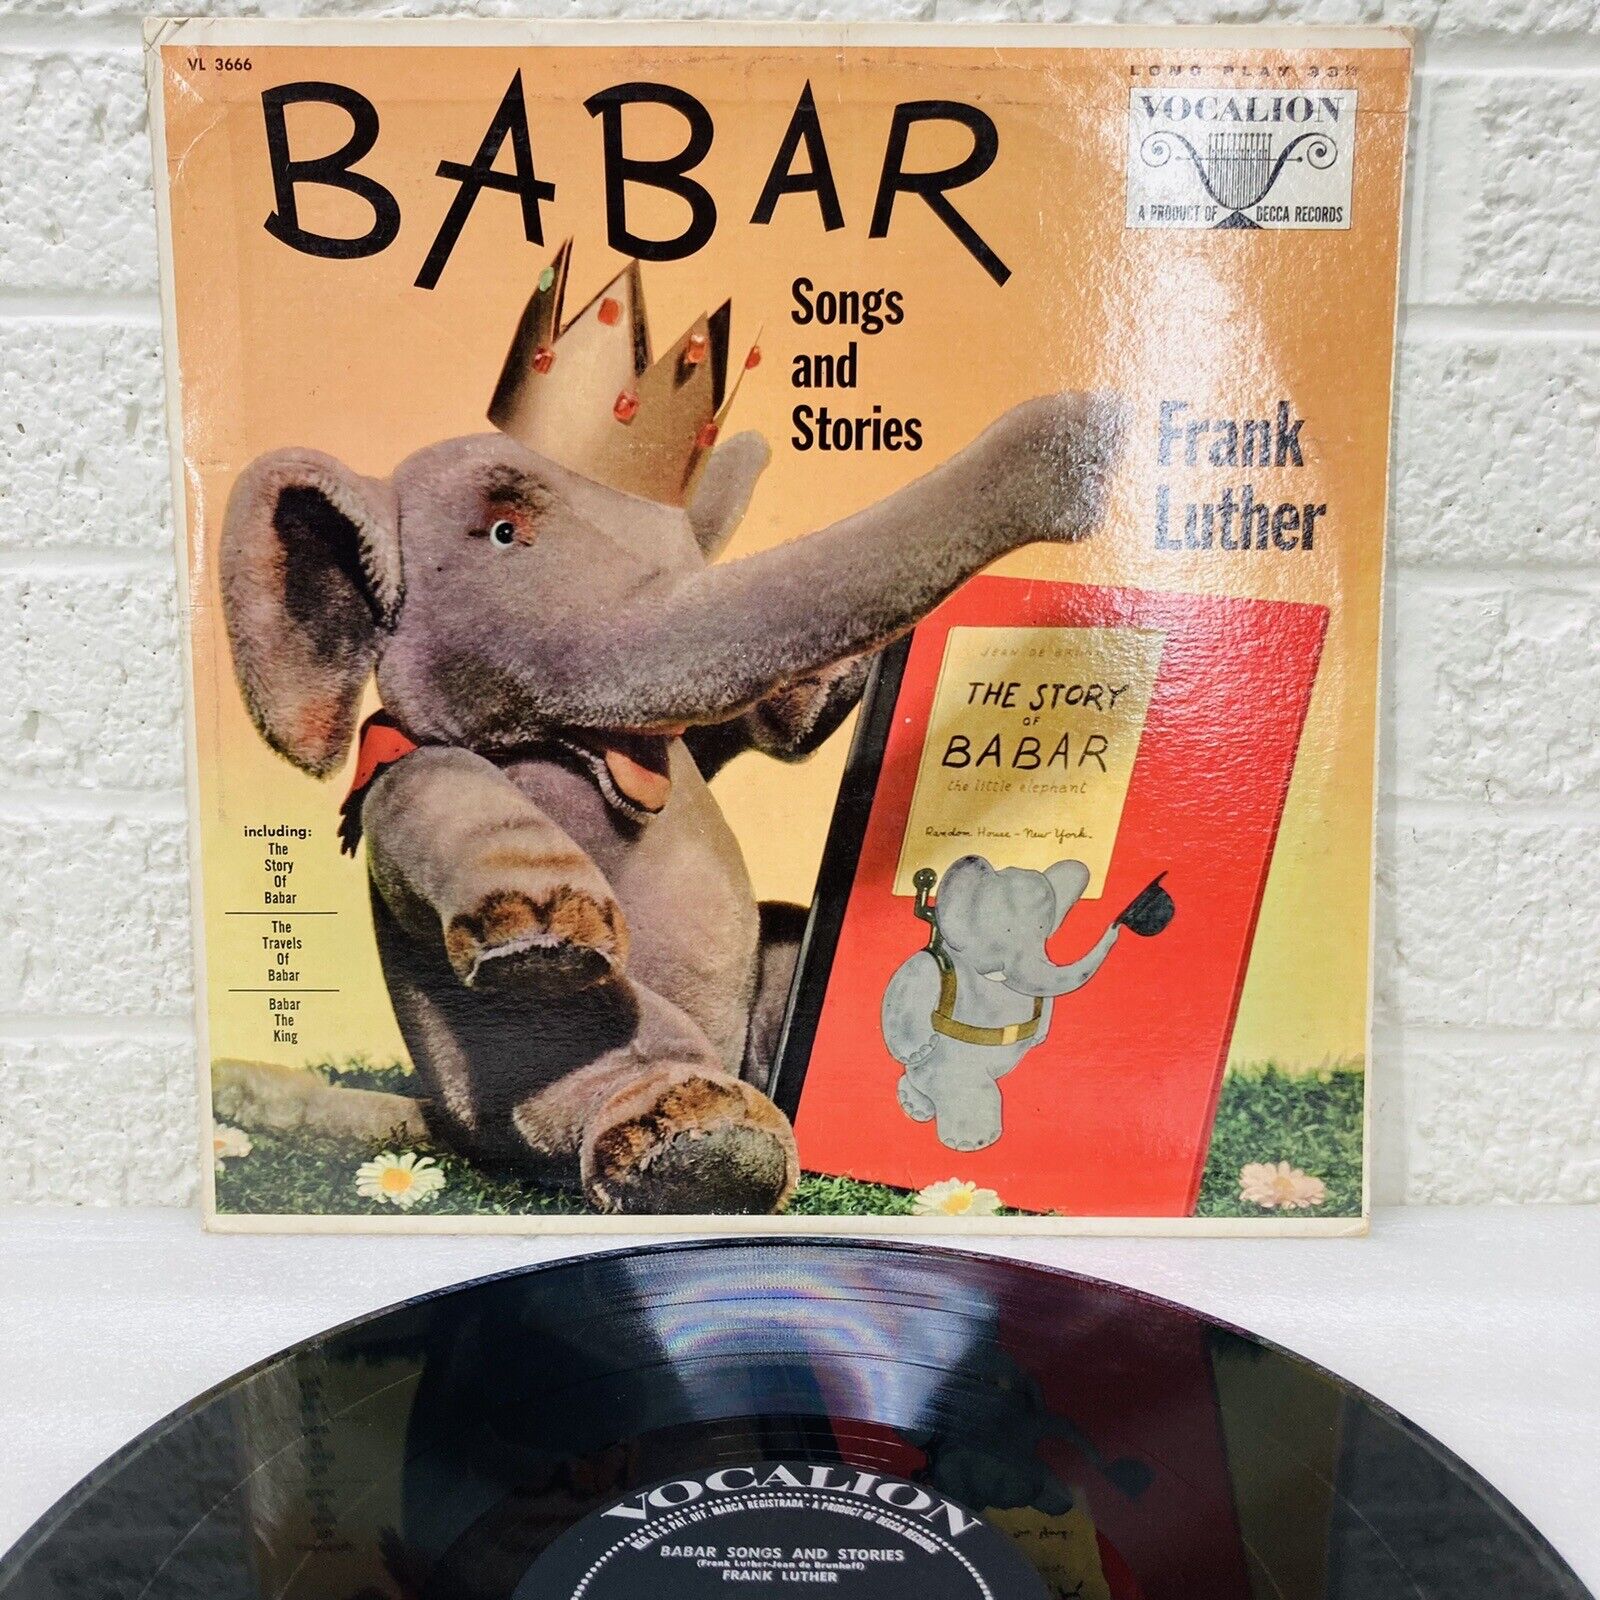 Frank Luther Babar Songs and Stories 12" LP Vocalion VL-3666 1959 • EX‼